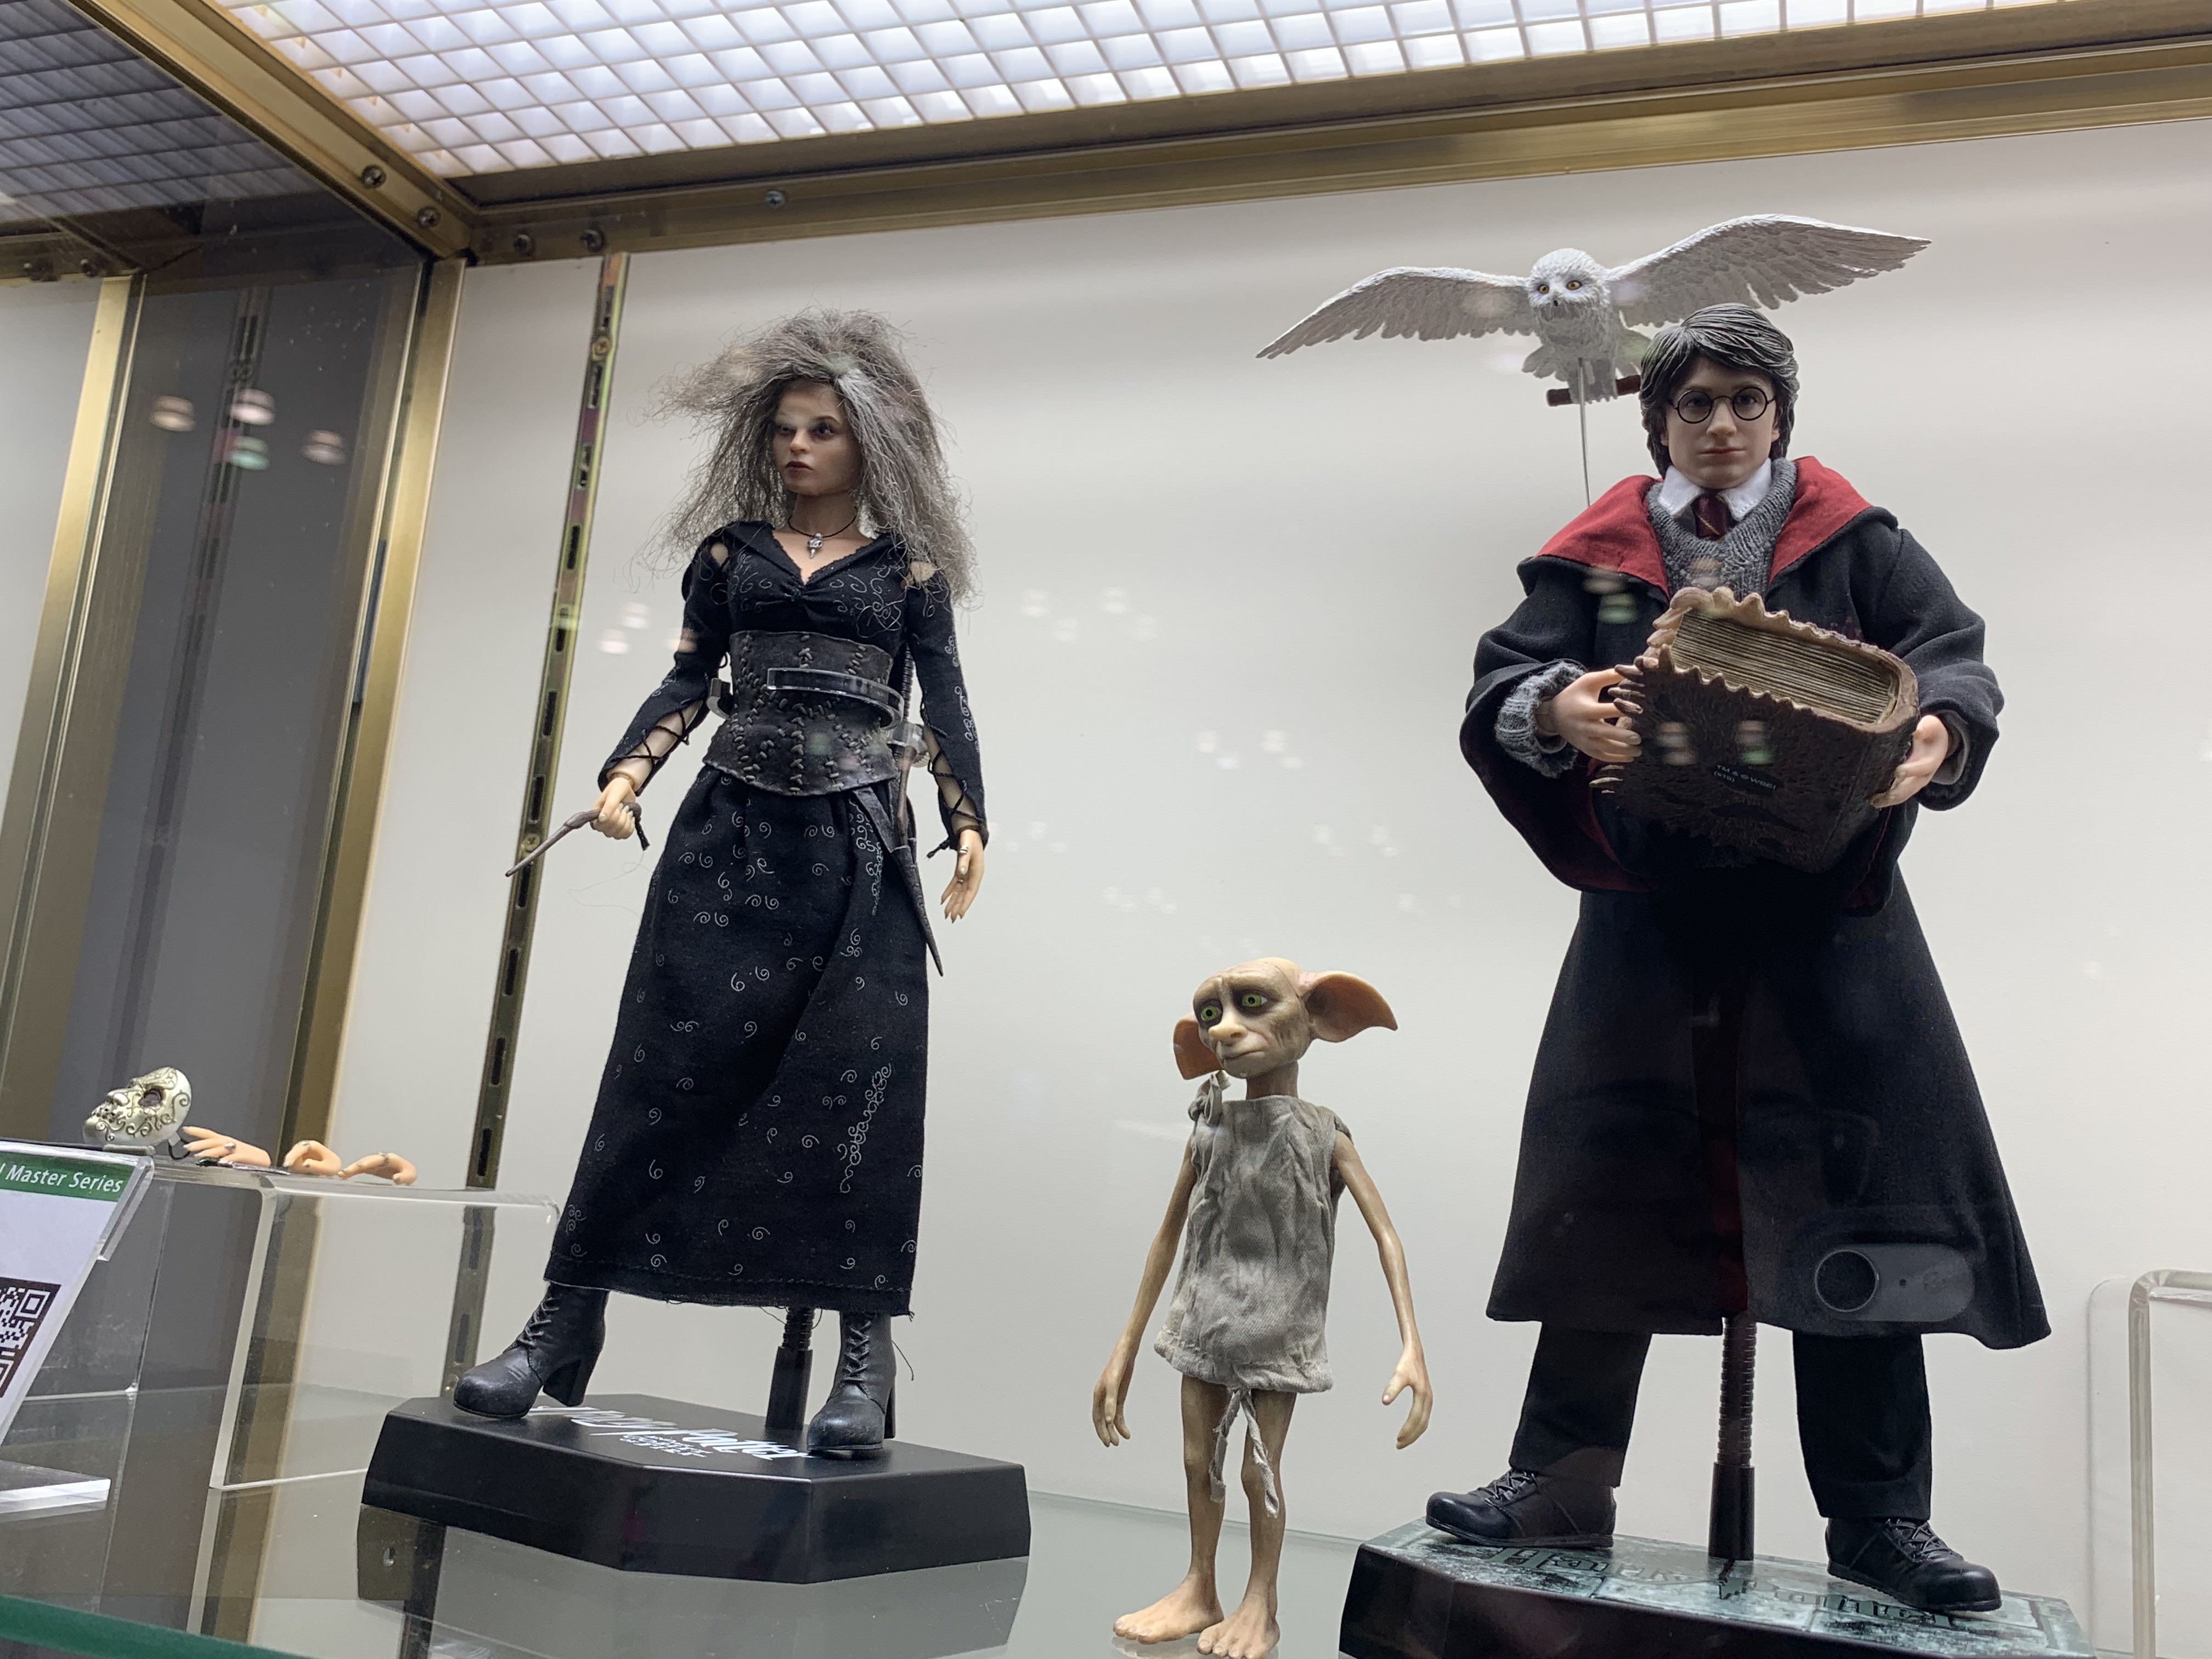 Star Ace Toys Limited’s “Harry Potter” figurines are among its most popular.